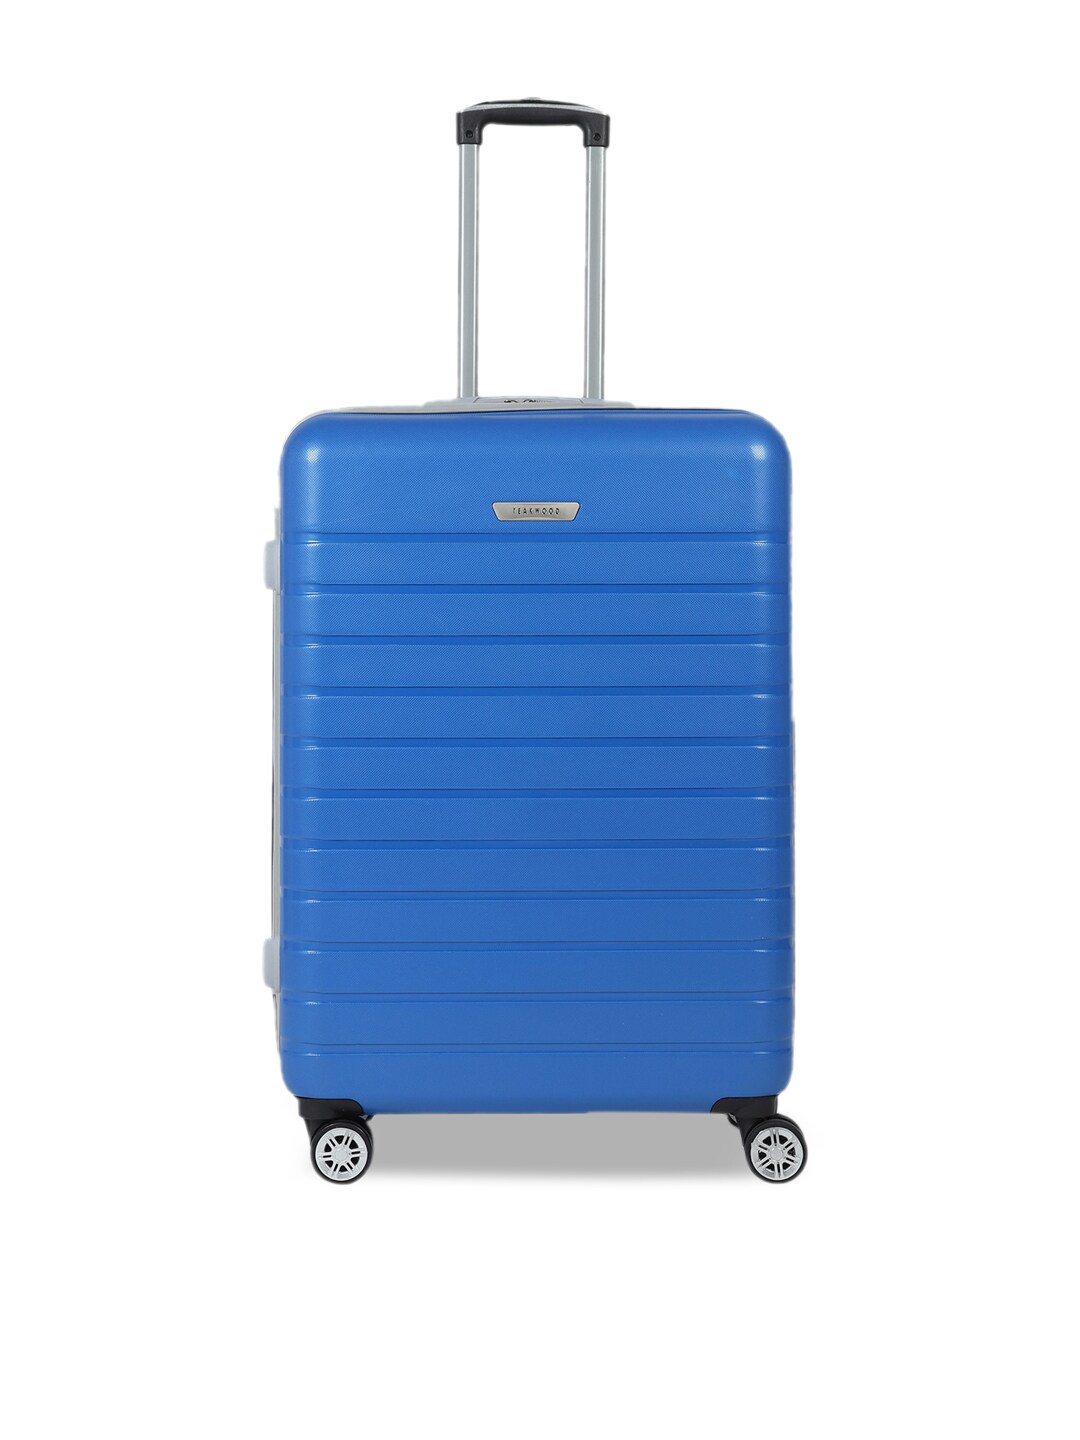 Teakwood Leathers Blue Textured Hard-Sided Large Trolley Suitcase Price in India